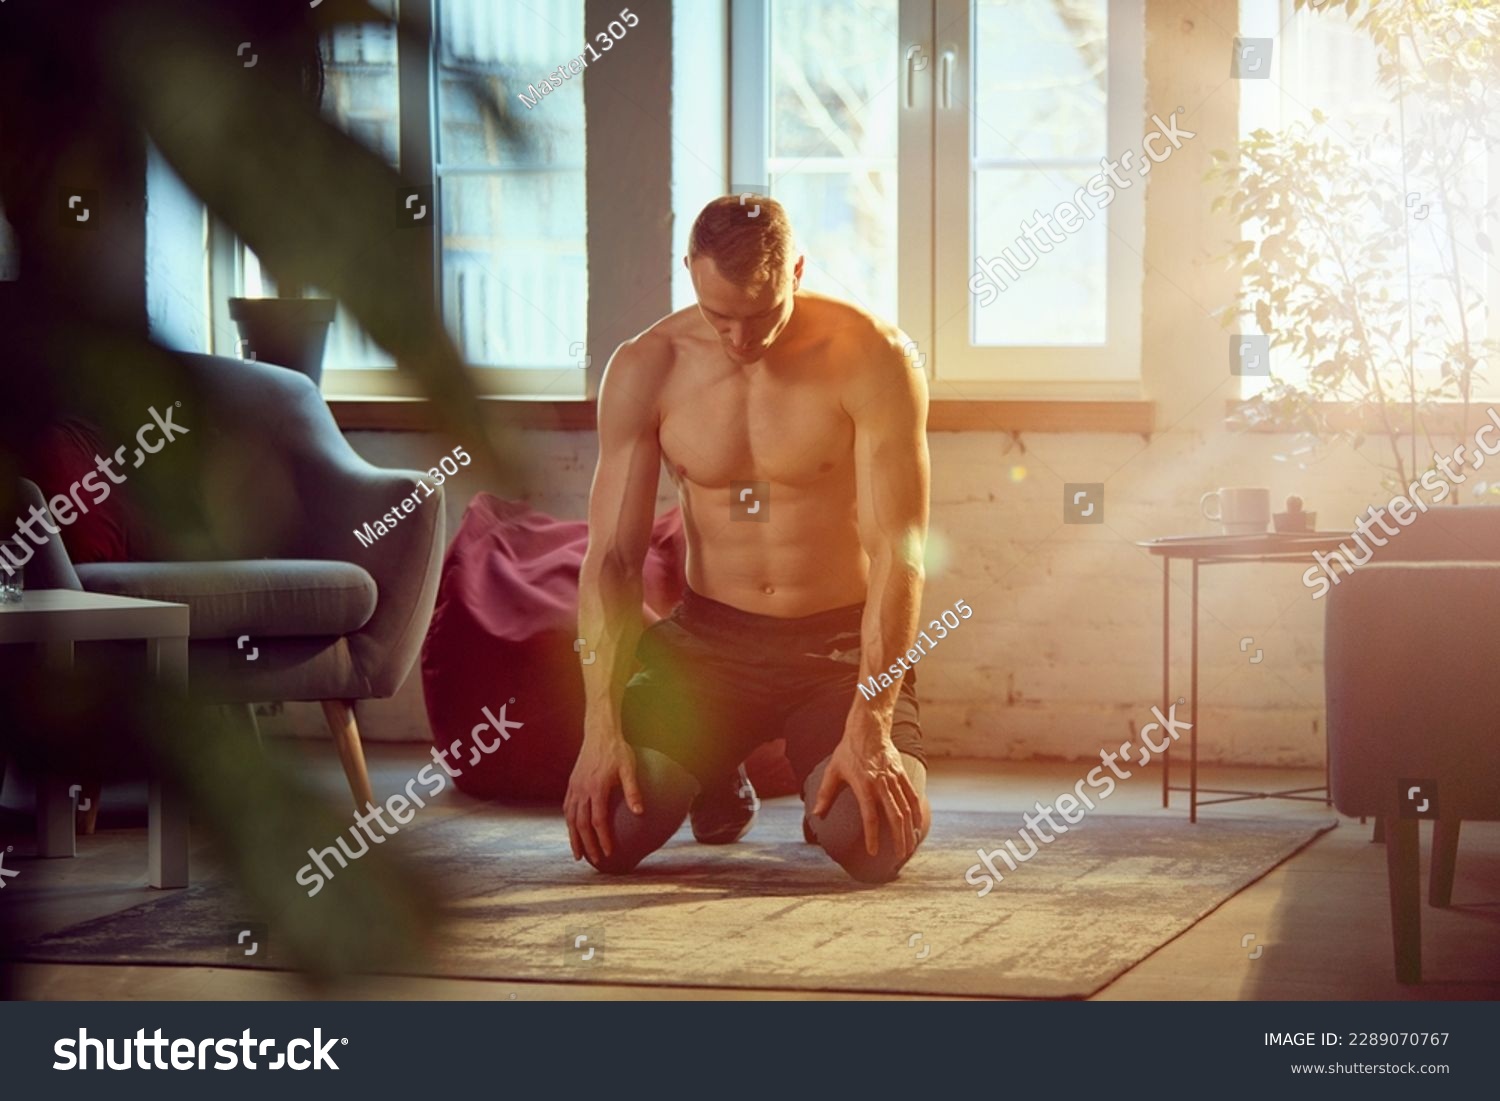 Young man with strong, muscular, relief body posing shirtless, doing home training on daytime with sunlight. Breathing. Concept of sportive lifestyle, body and health care, fitness, health #2289070767